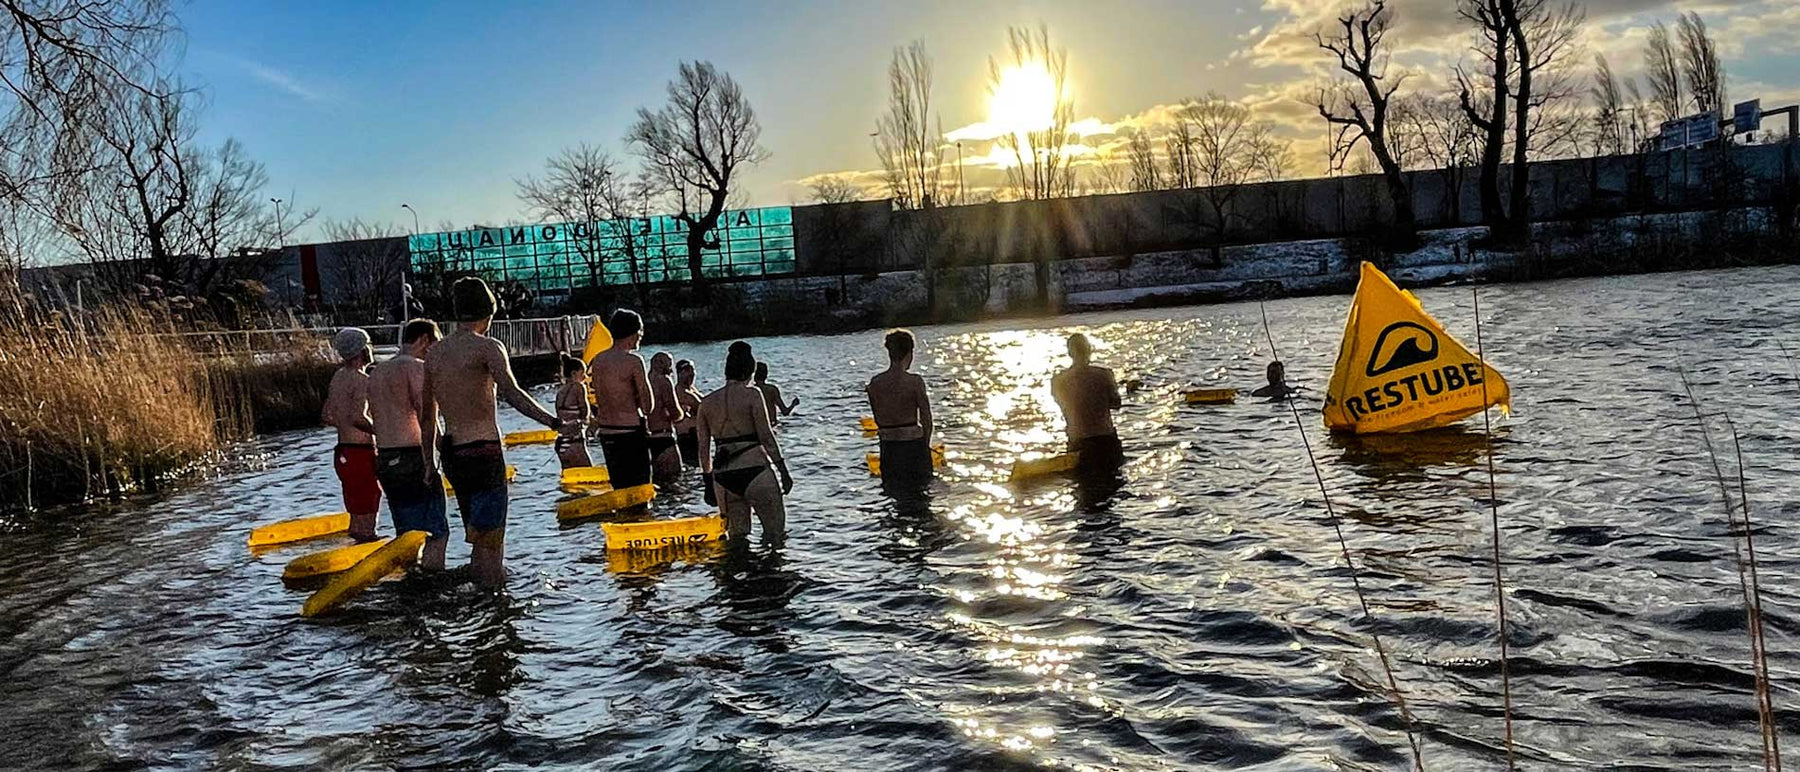 Ice swimming with Josef Köberl with Restube active